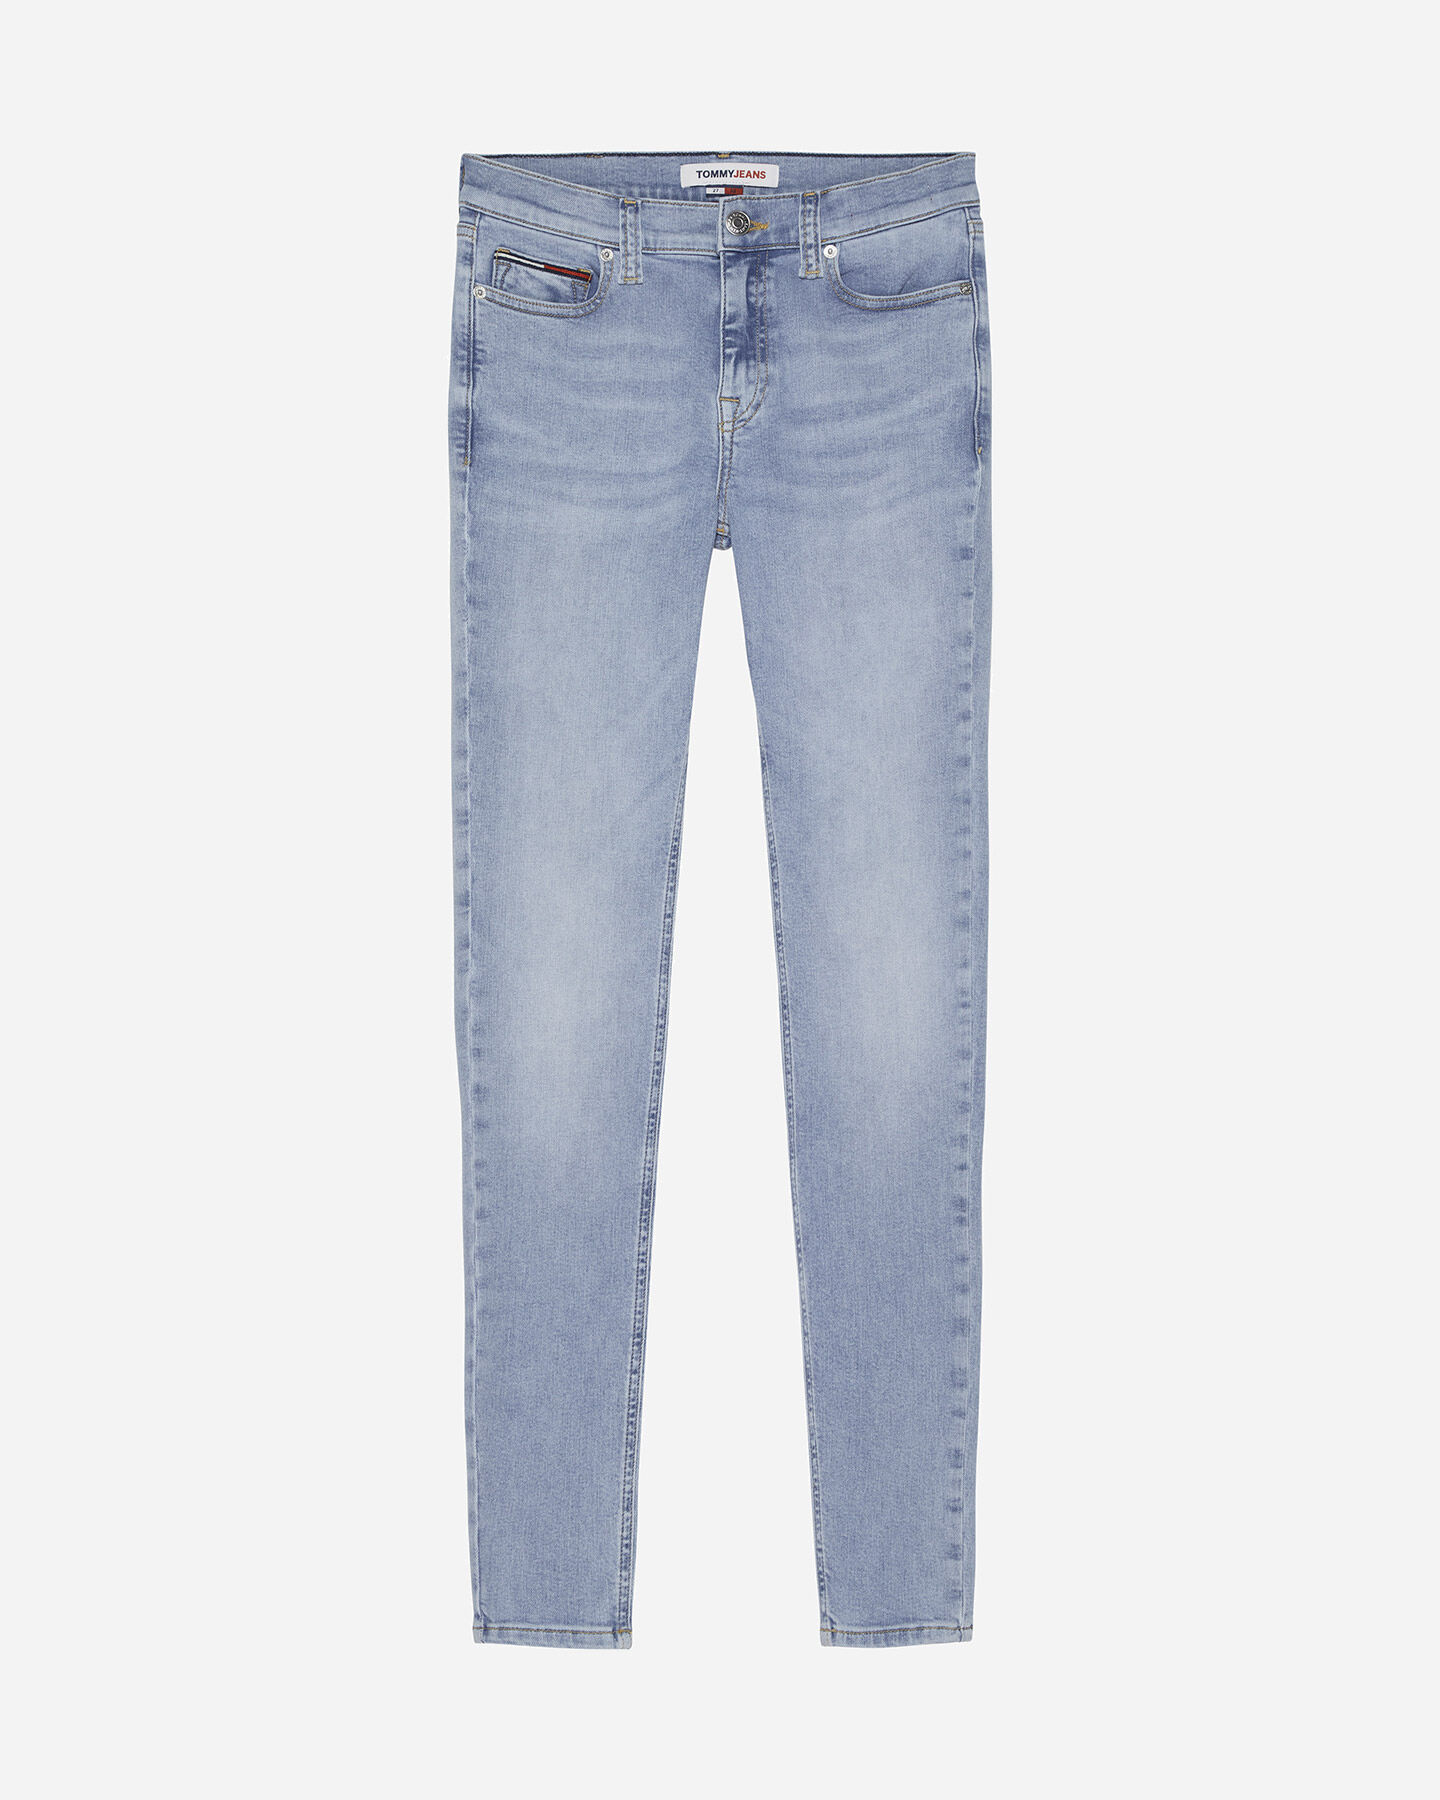  Jeans TOMMY HILFIGER NORA SKINNY W S4122979|1AB|26 scatto 0